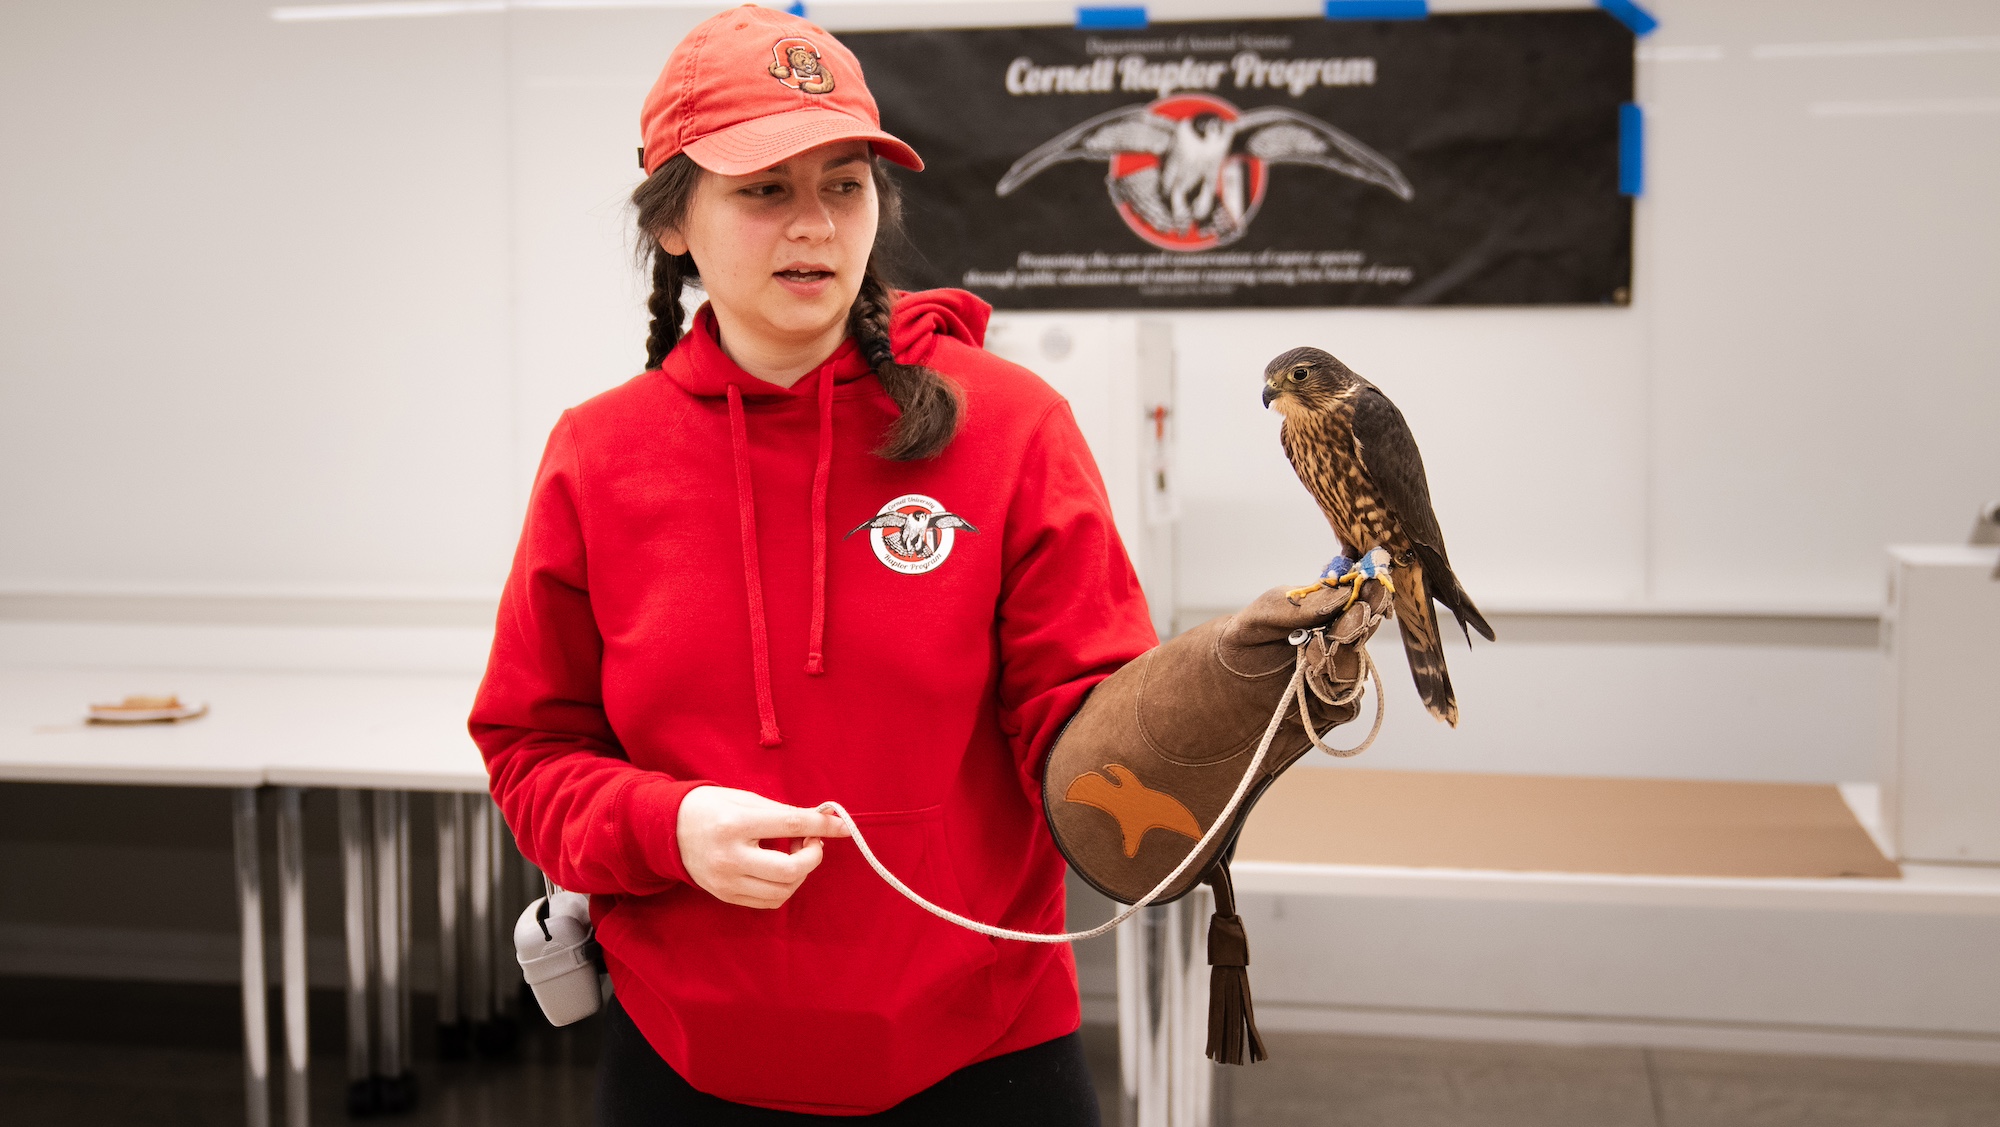 A volunteer shows a raptor to the camera